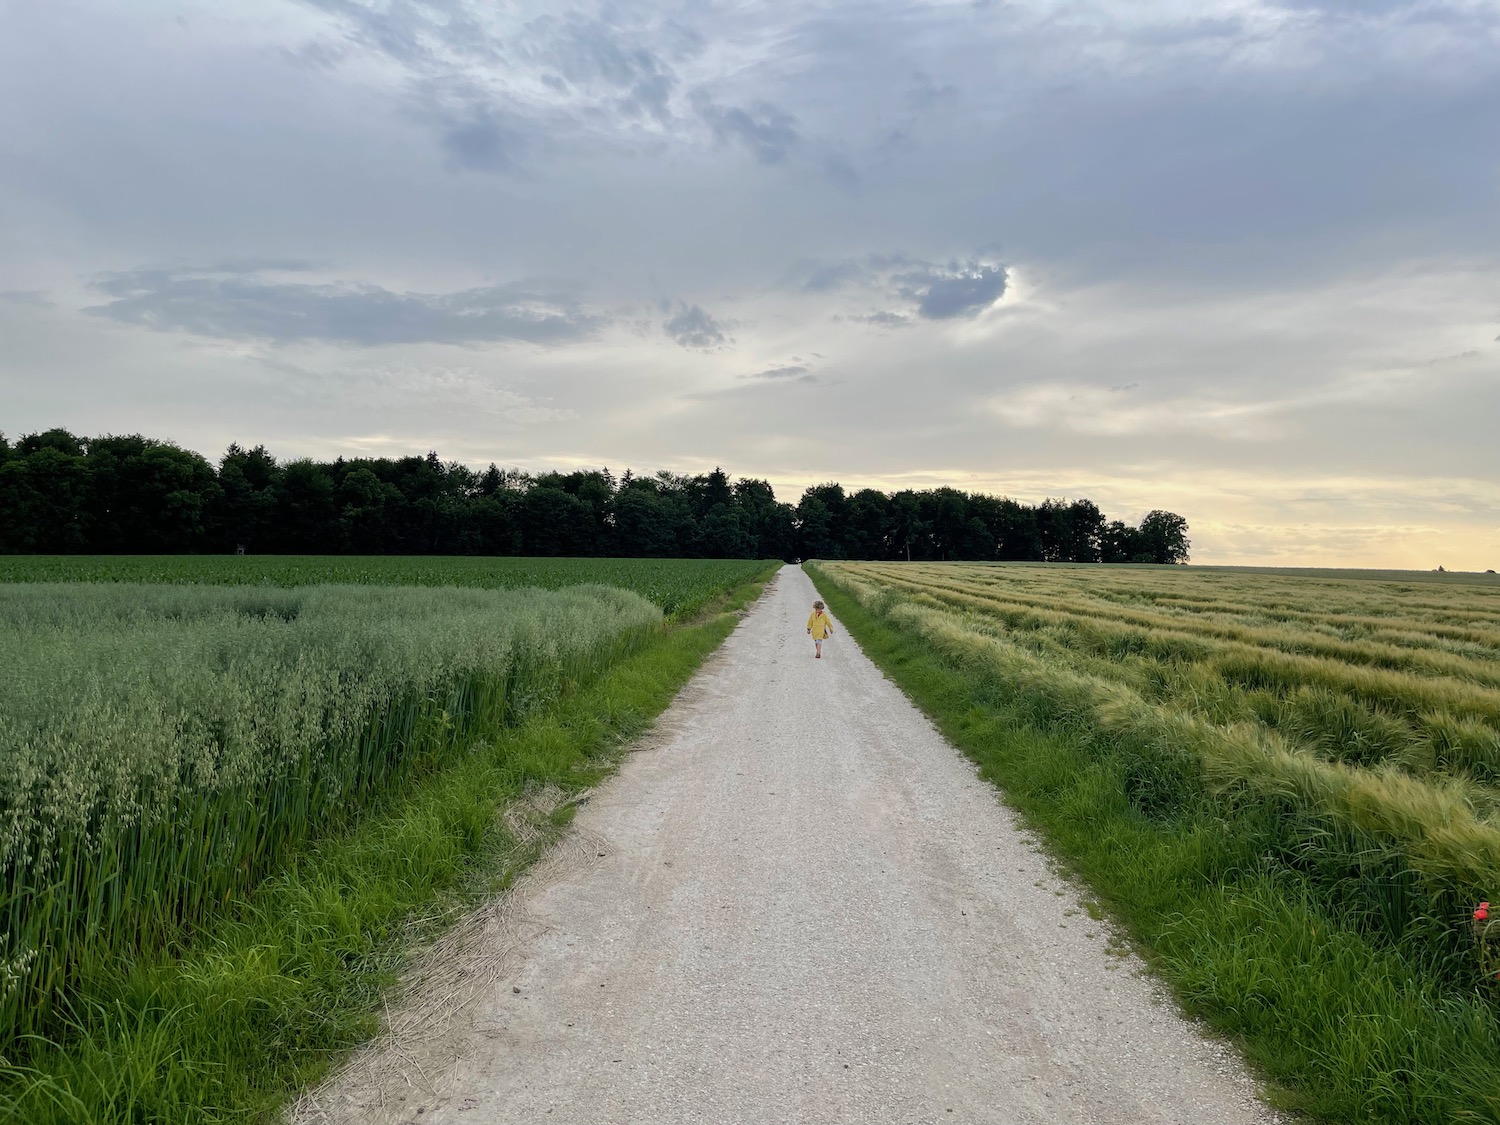 a person walking on a dirt road with grass and trees in the background